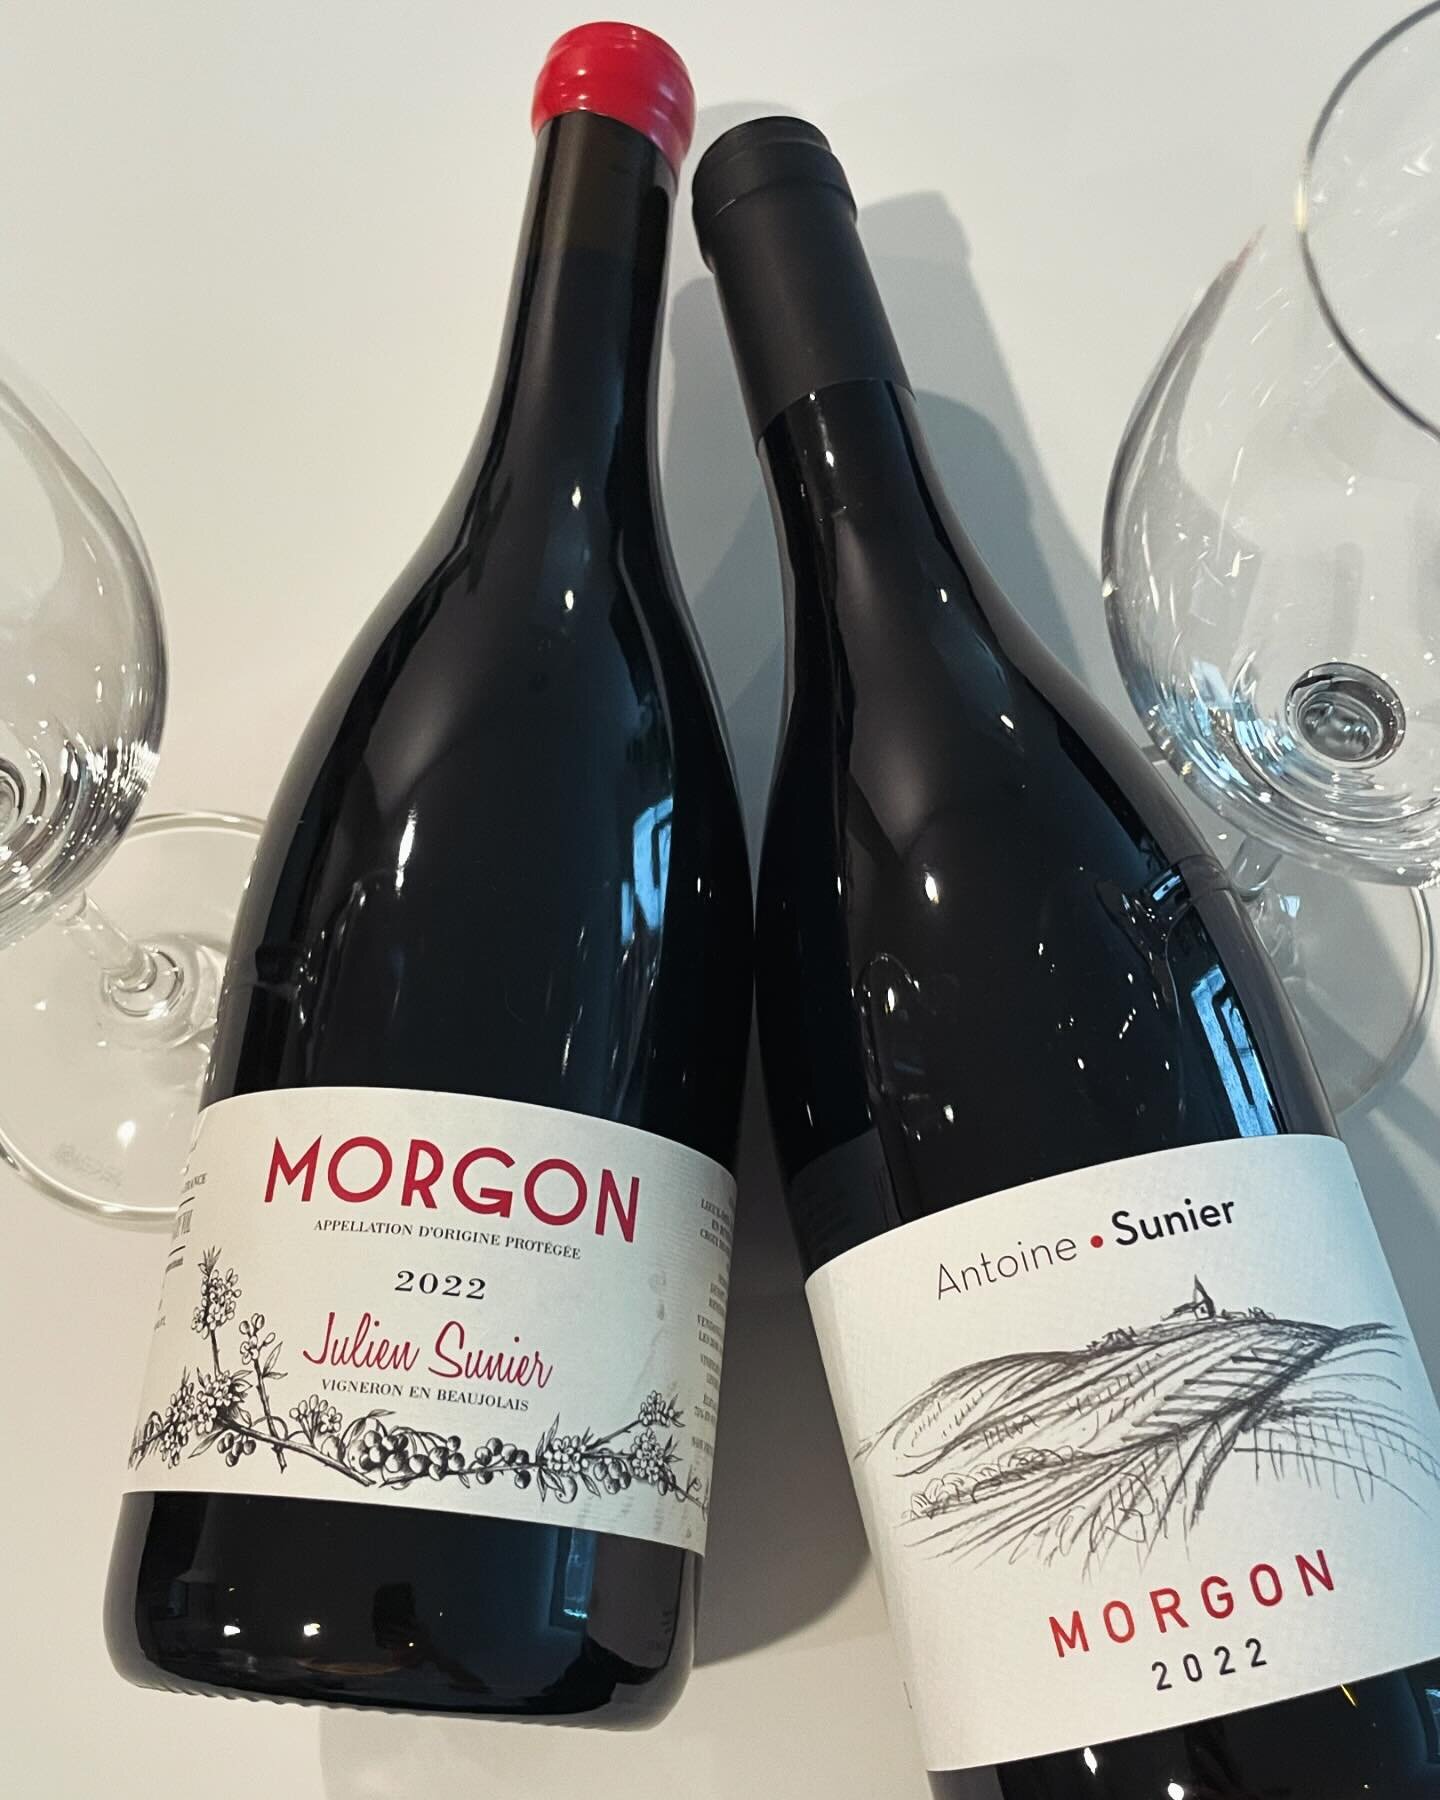 Wednesday Vibes &amp; Imbibes 🍇🍷
What we&rsquo;re sippin&rsquo; on this week: Gamay from Morgon!  We can&rsquo;t choose just one, so we recommend getting both! @julien_sunier @antoine.sunier @beckywasserman.co 
&bull;
&bull;
#brothers #gamay #beauj